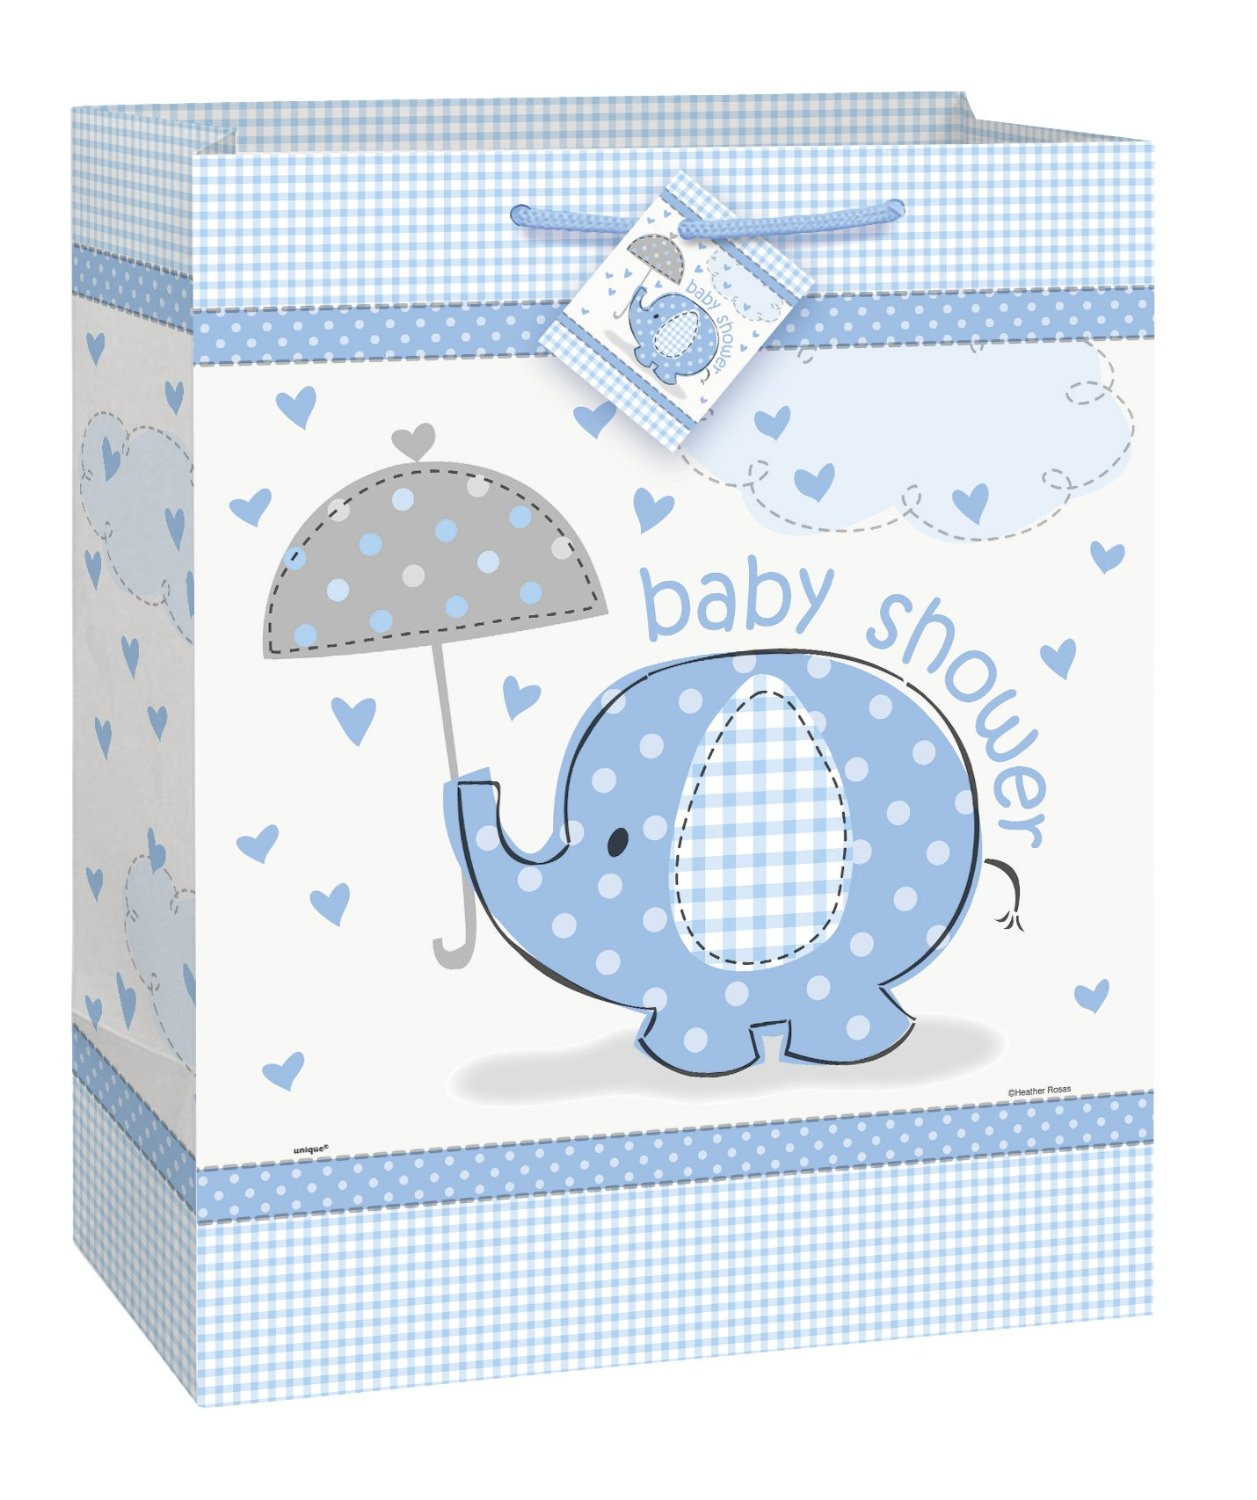 Baby Gift Bag Ideas
 Indian Baby Shower Decoration Ideas and Checklist